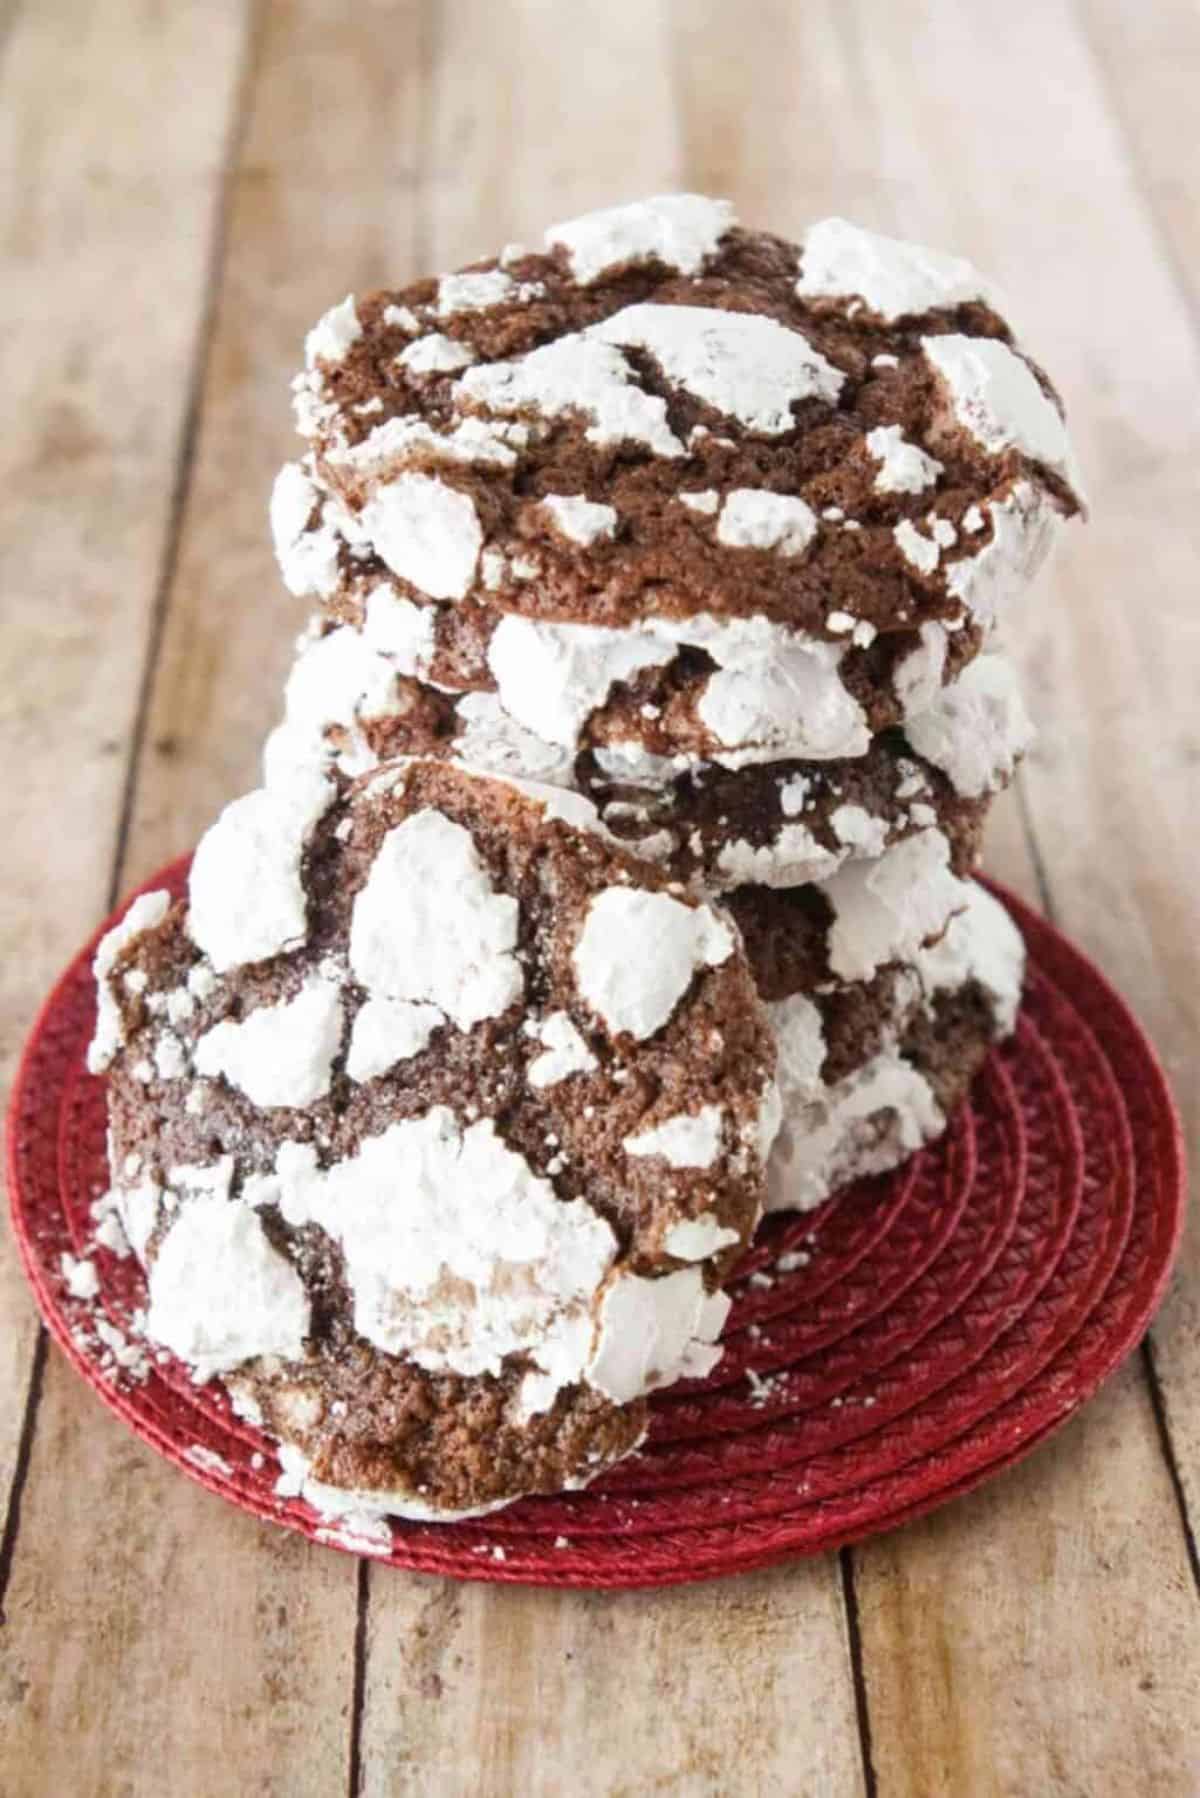 A pile ofChocolate Crackle Cookies on a red plate.